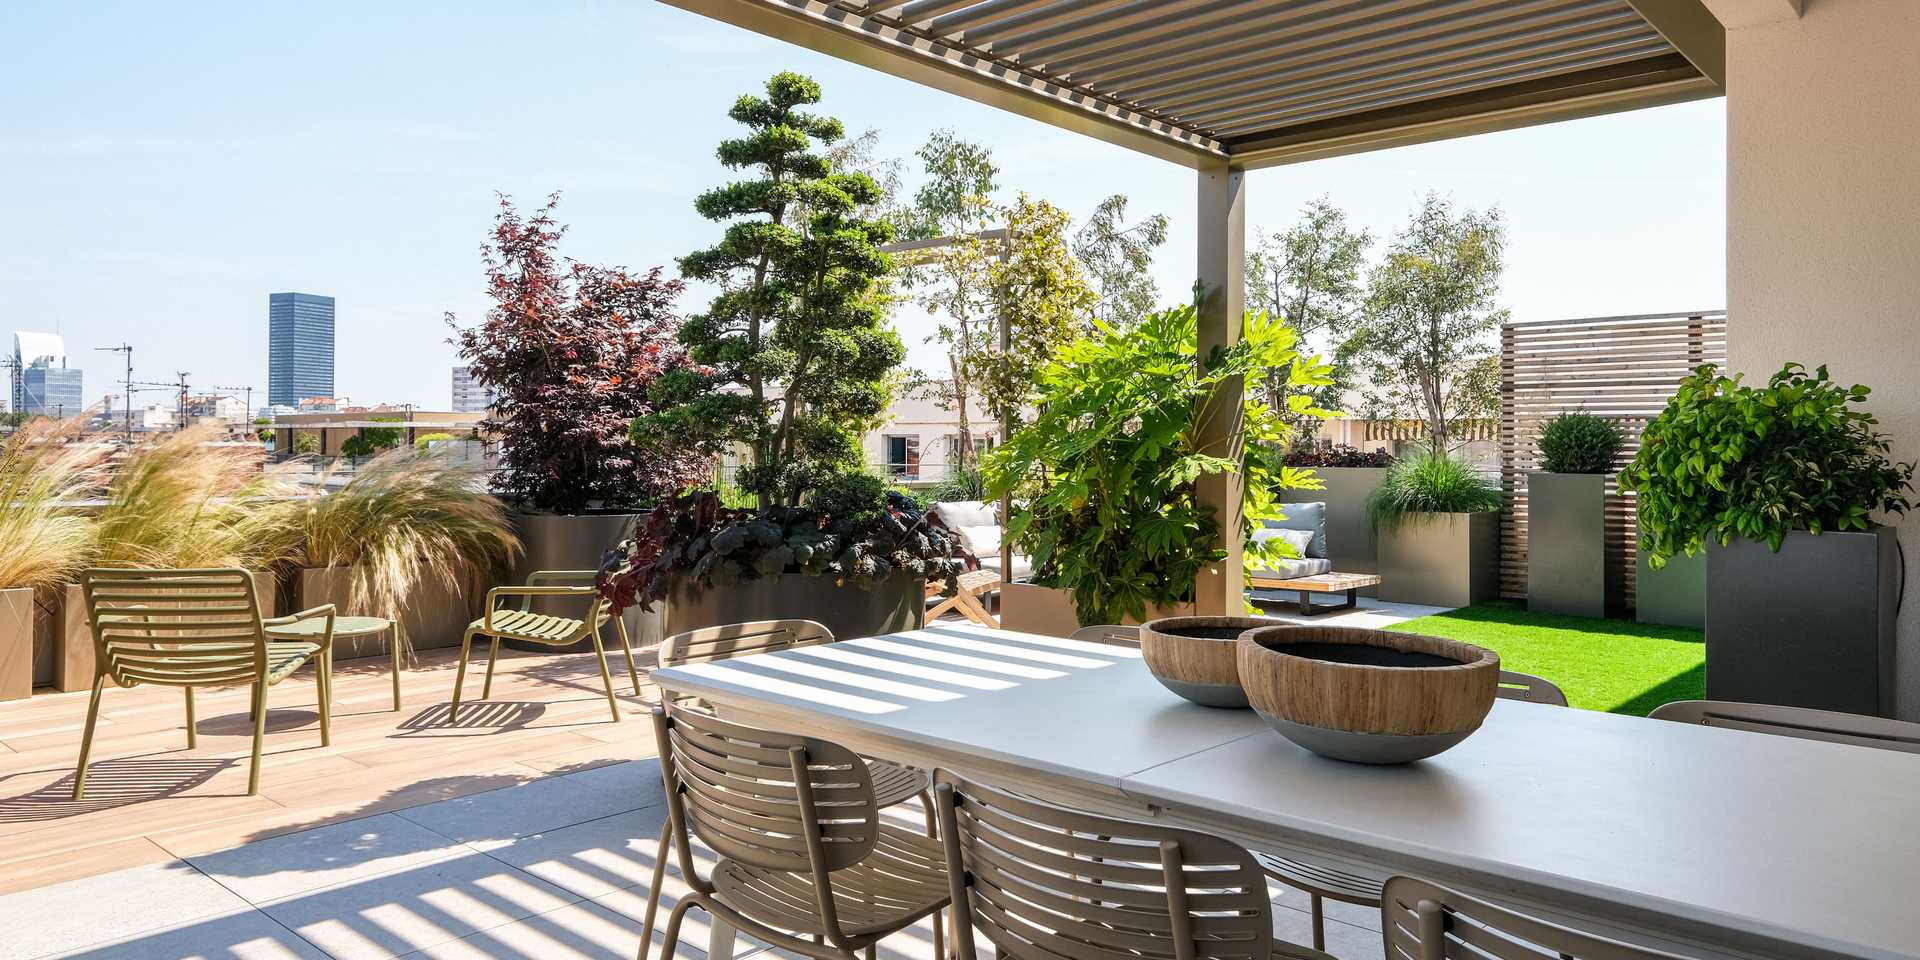 Terrace of an apartment in Lyon designed by a landscape architect